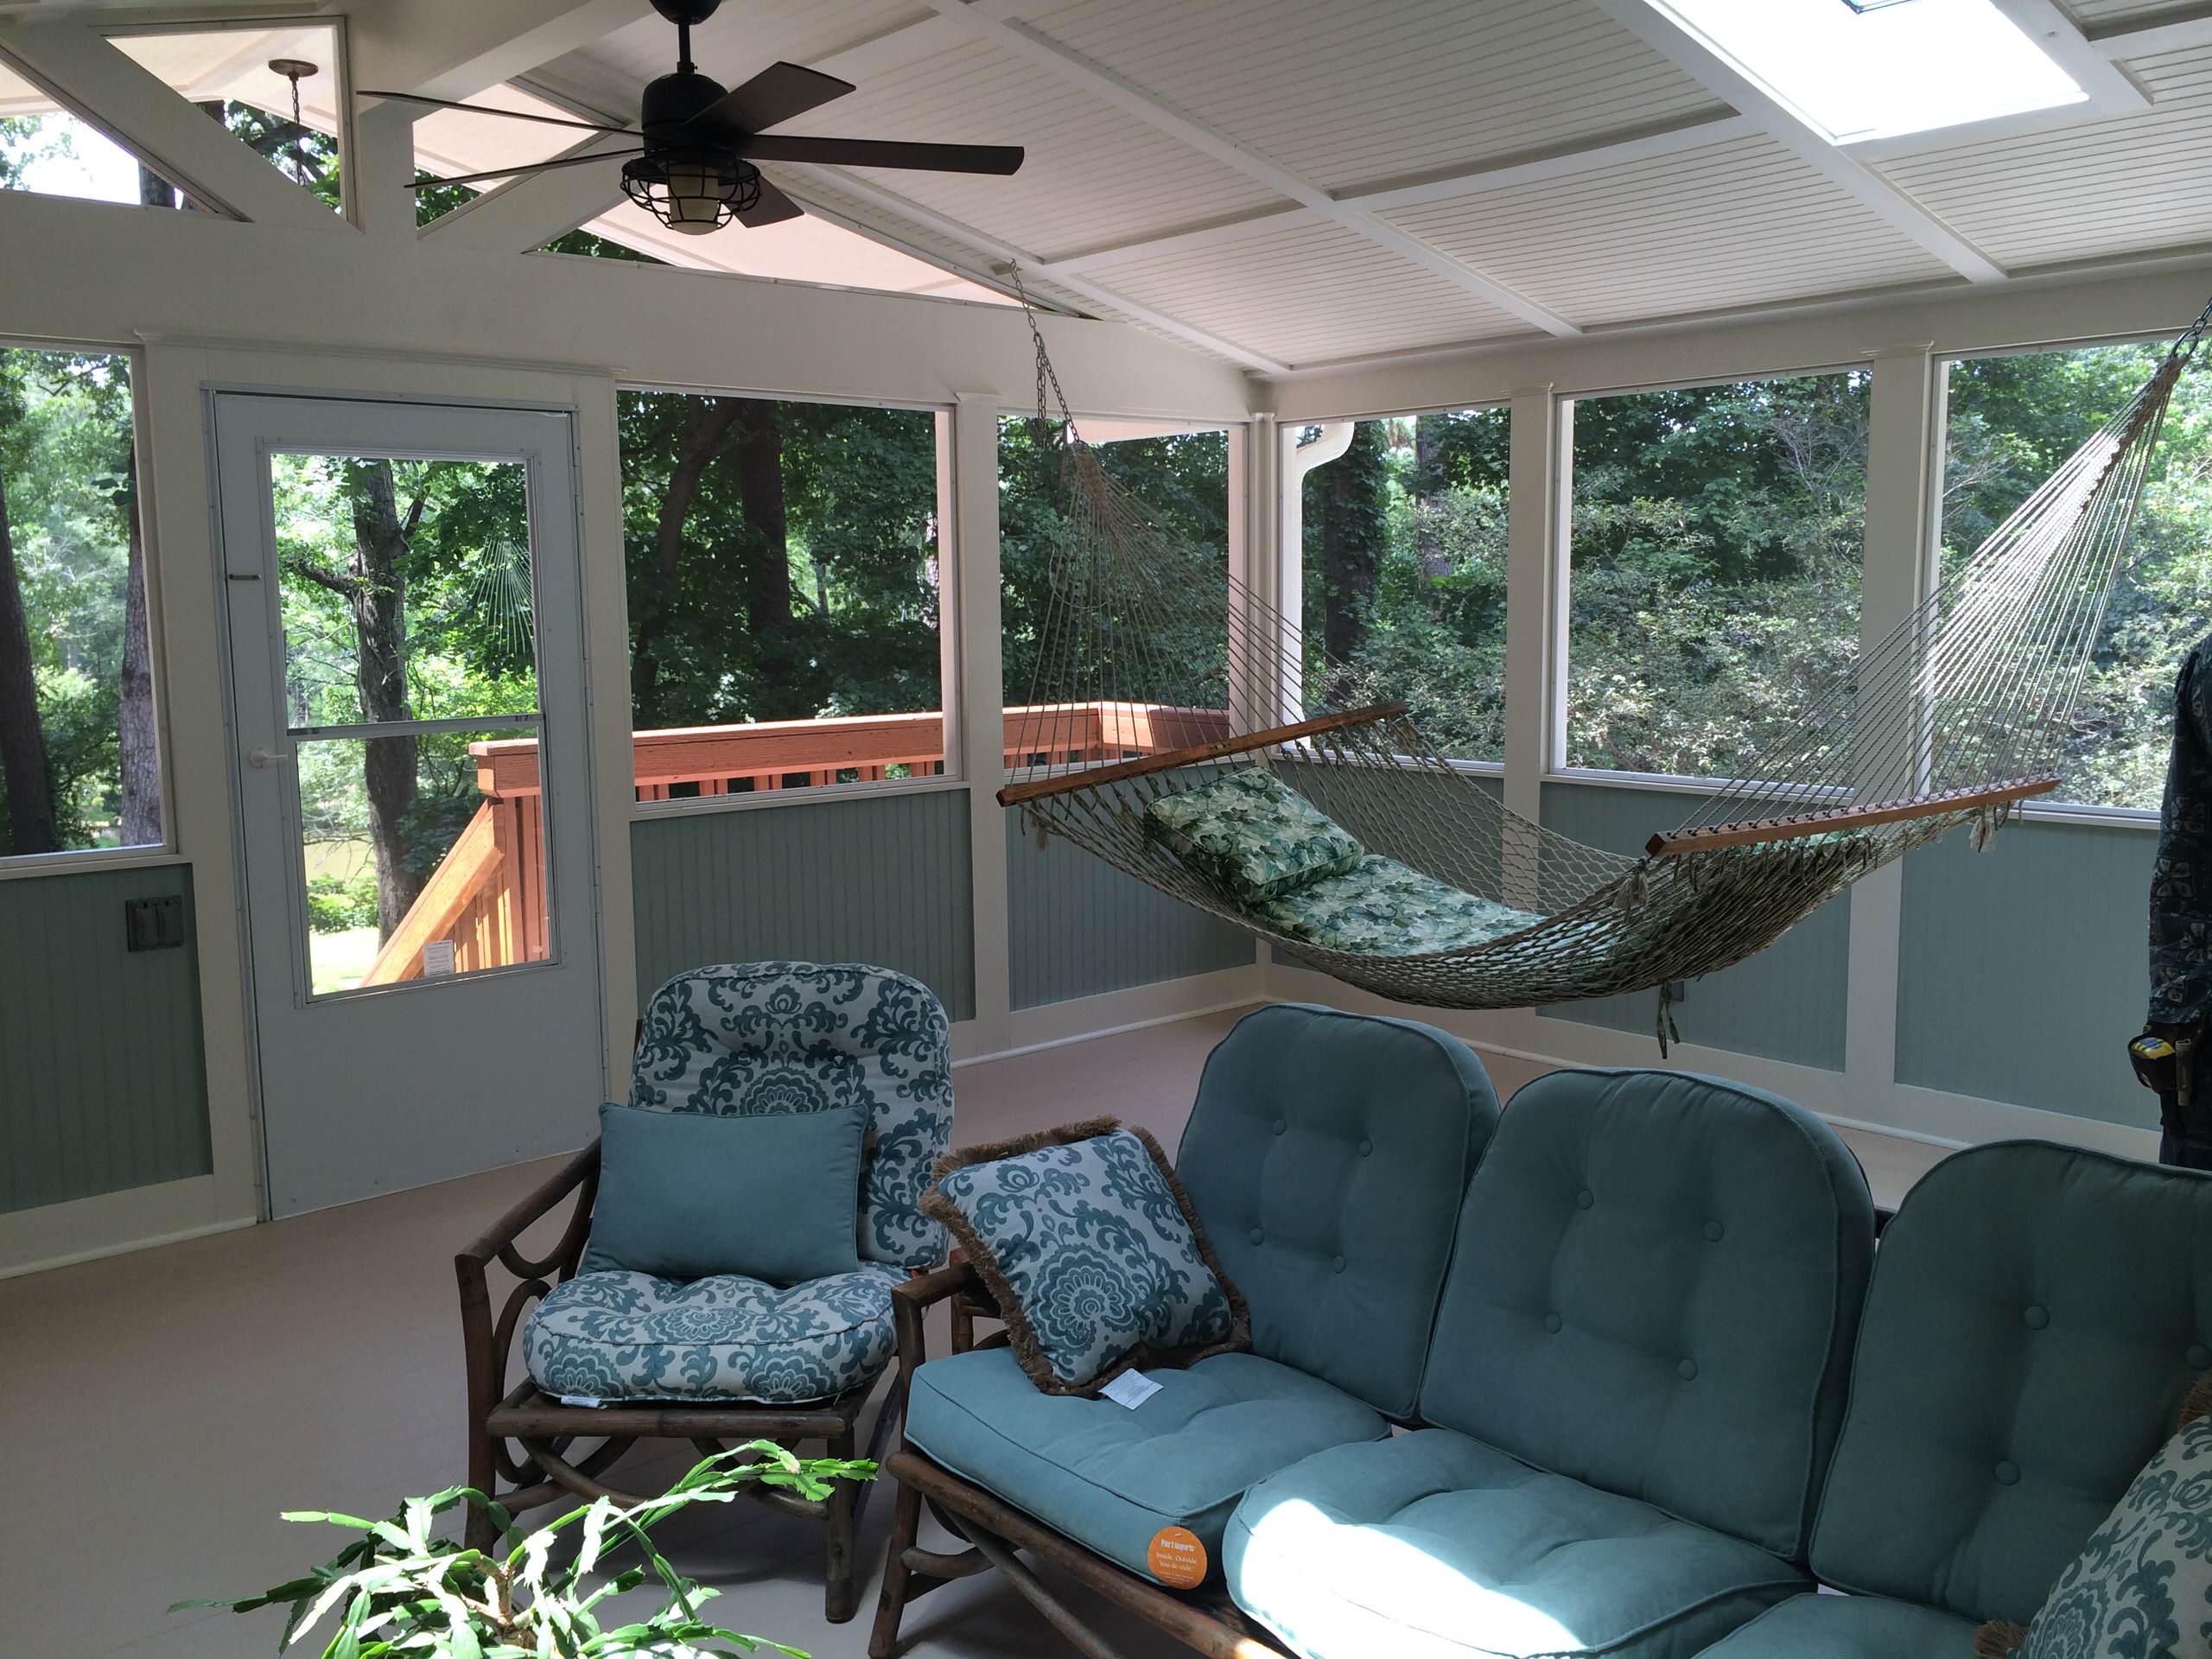 Second Story Screened In Porch